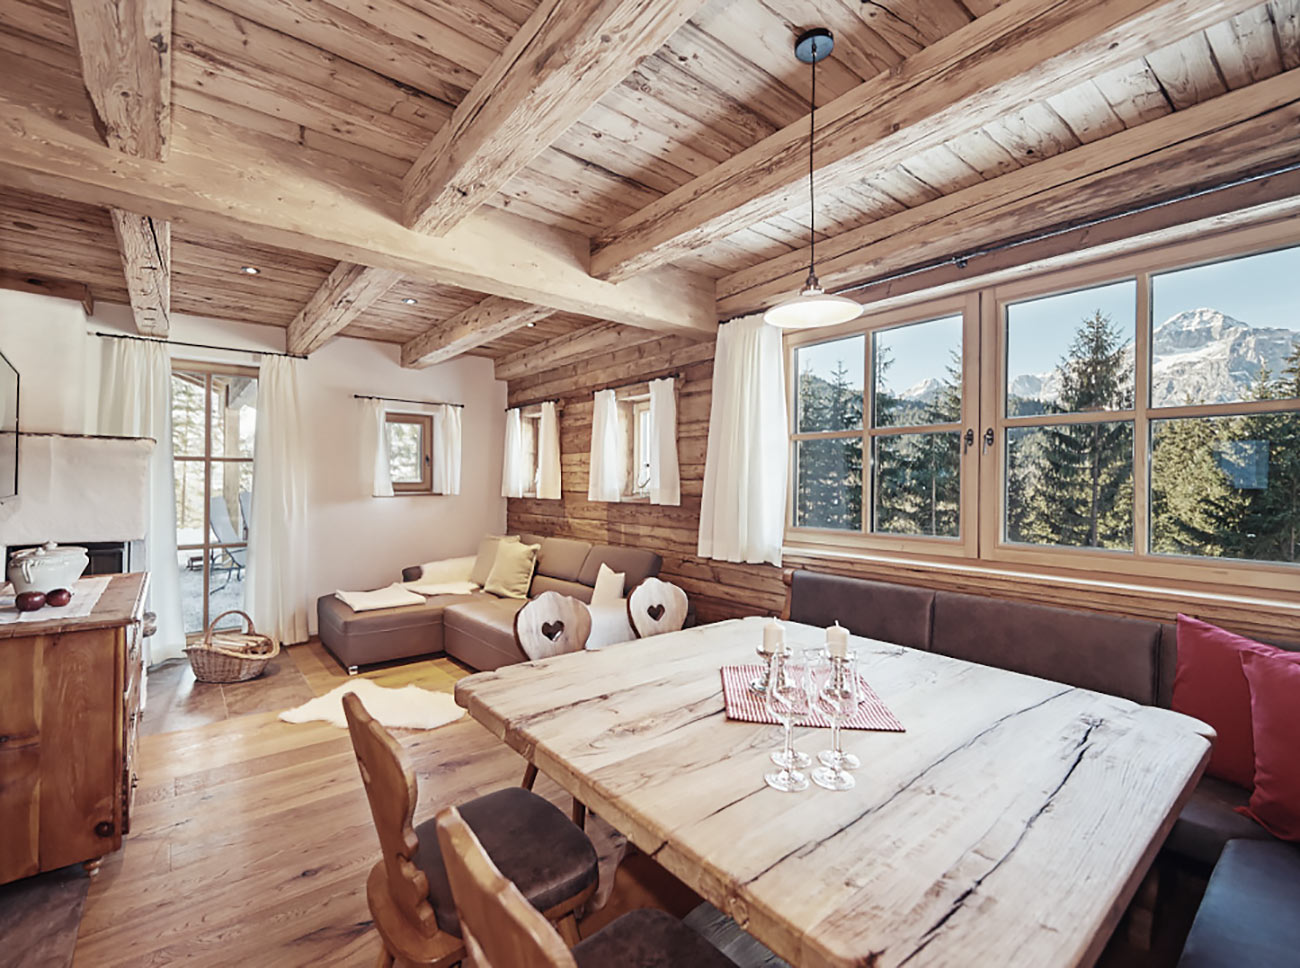 Pretty Hotels: Almidylle Chalets (Image 3)